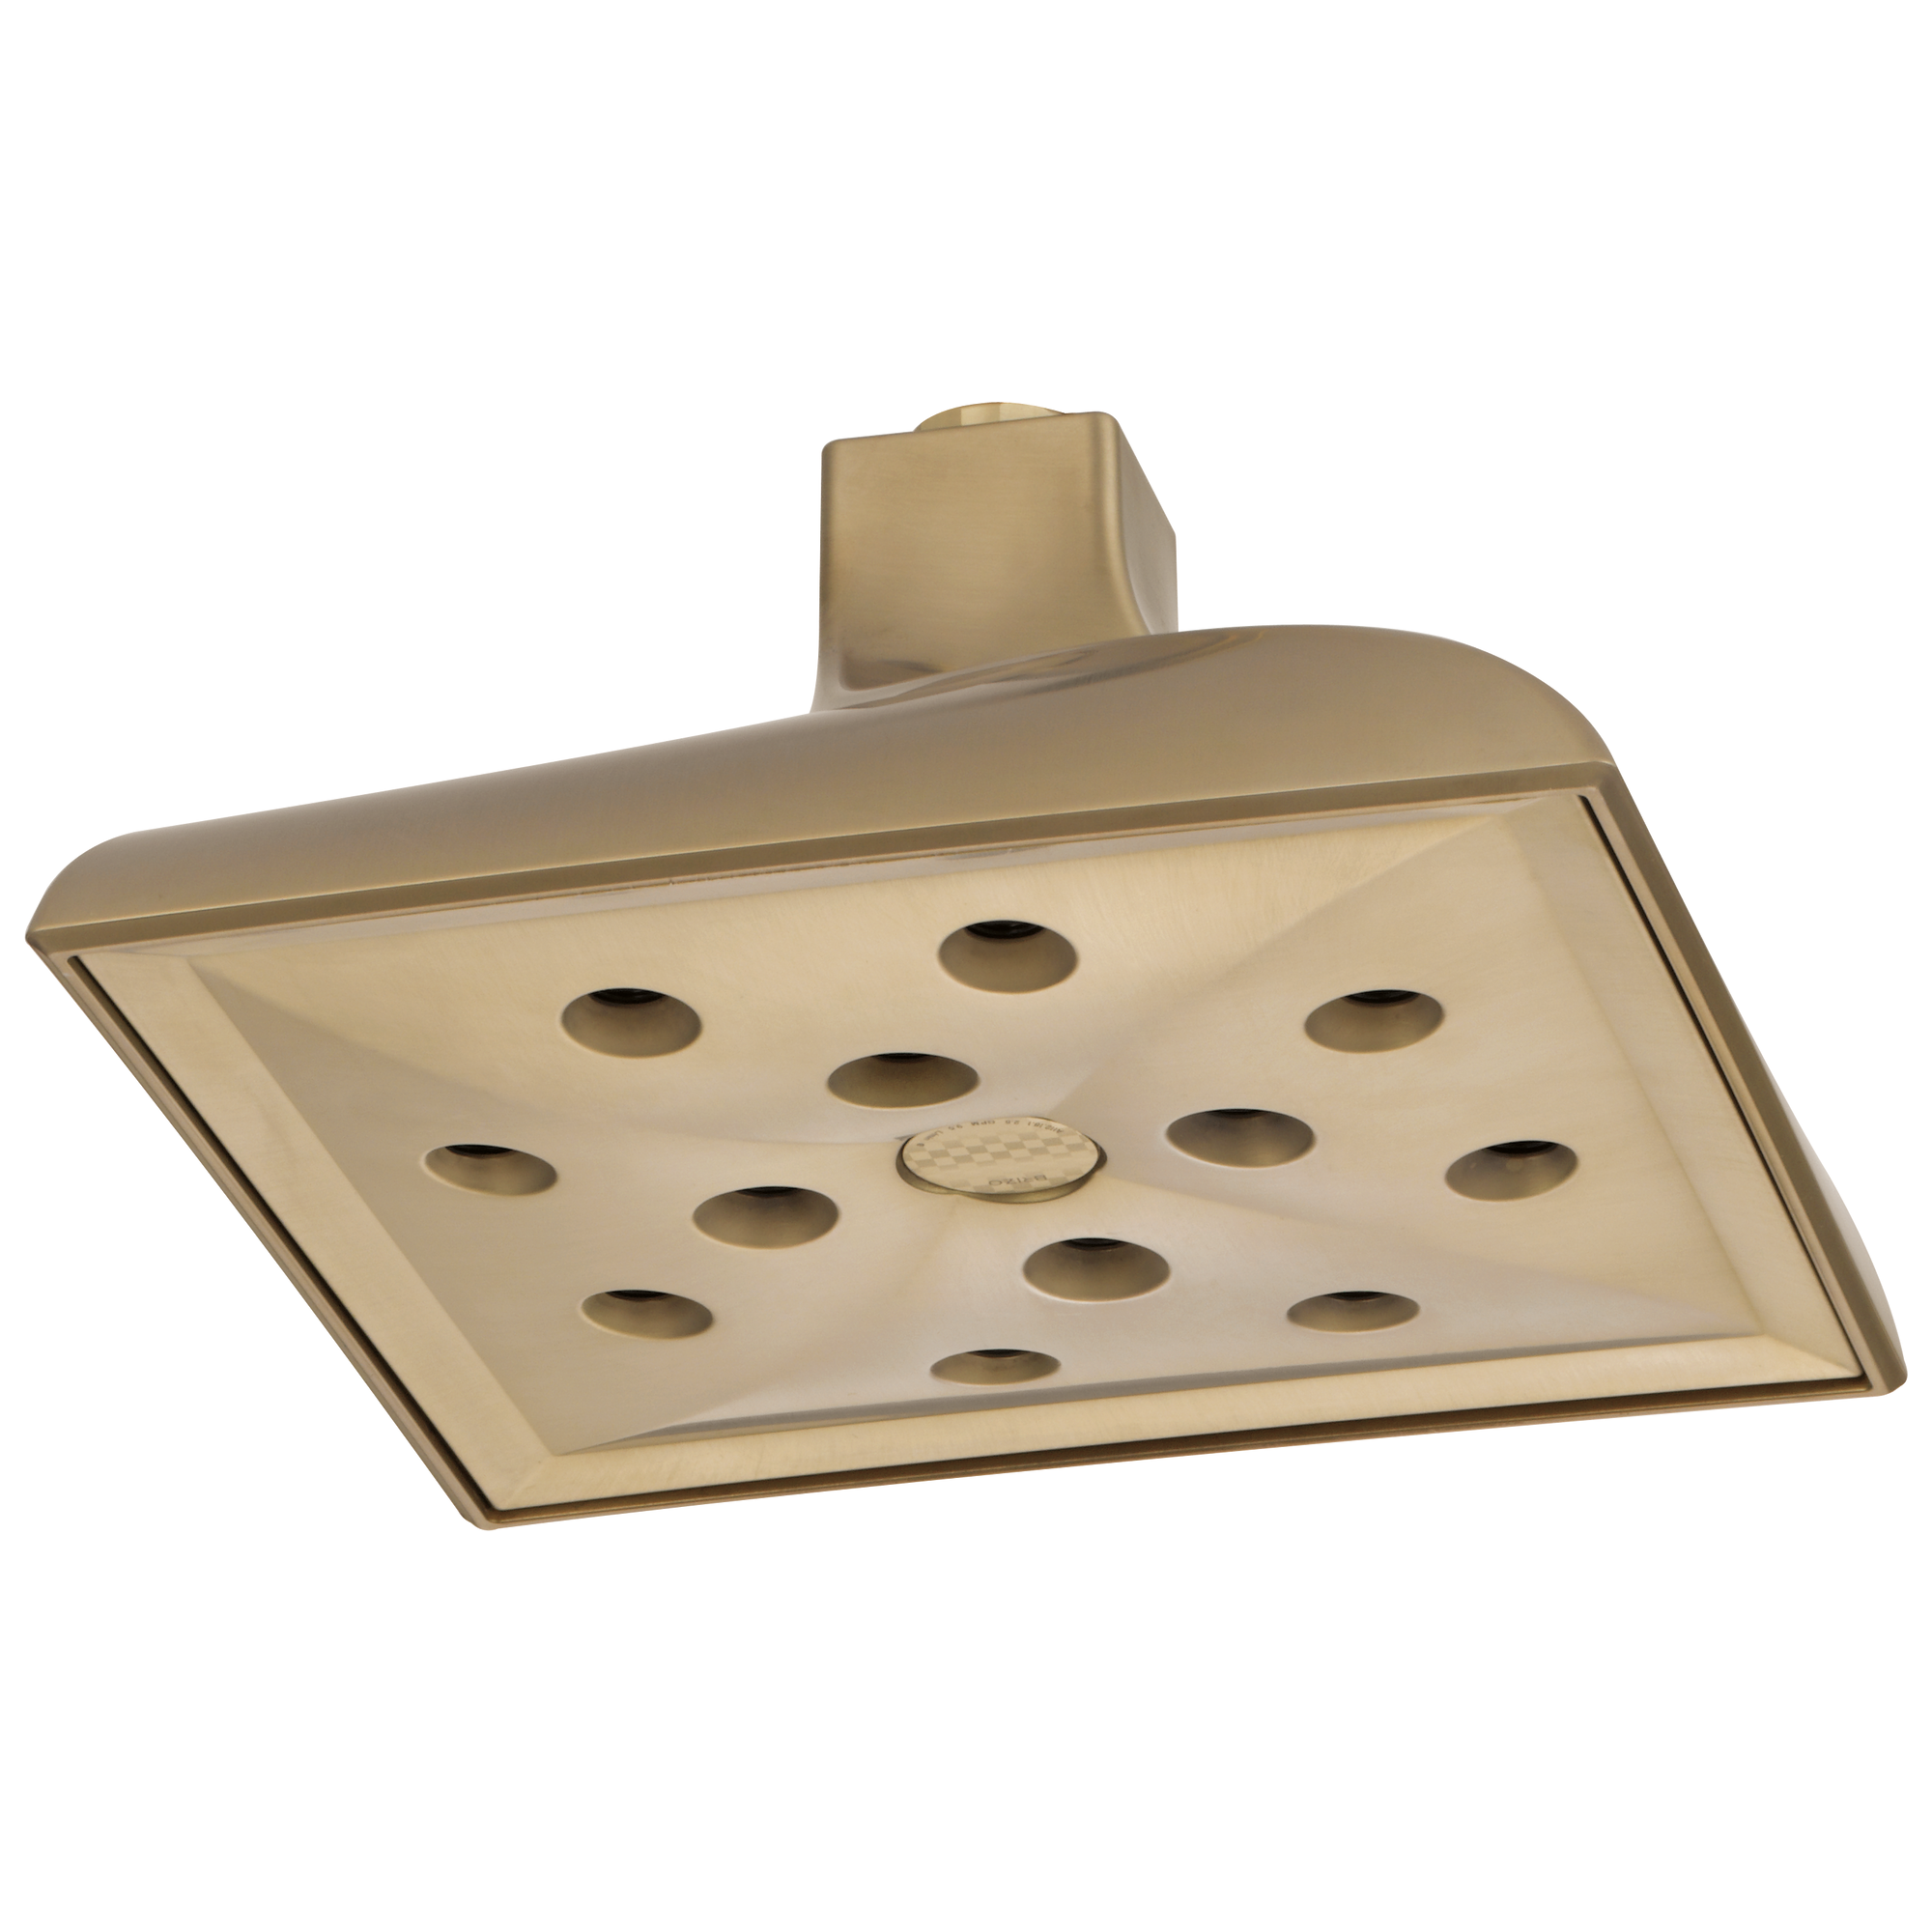 luxe gold showerhead